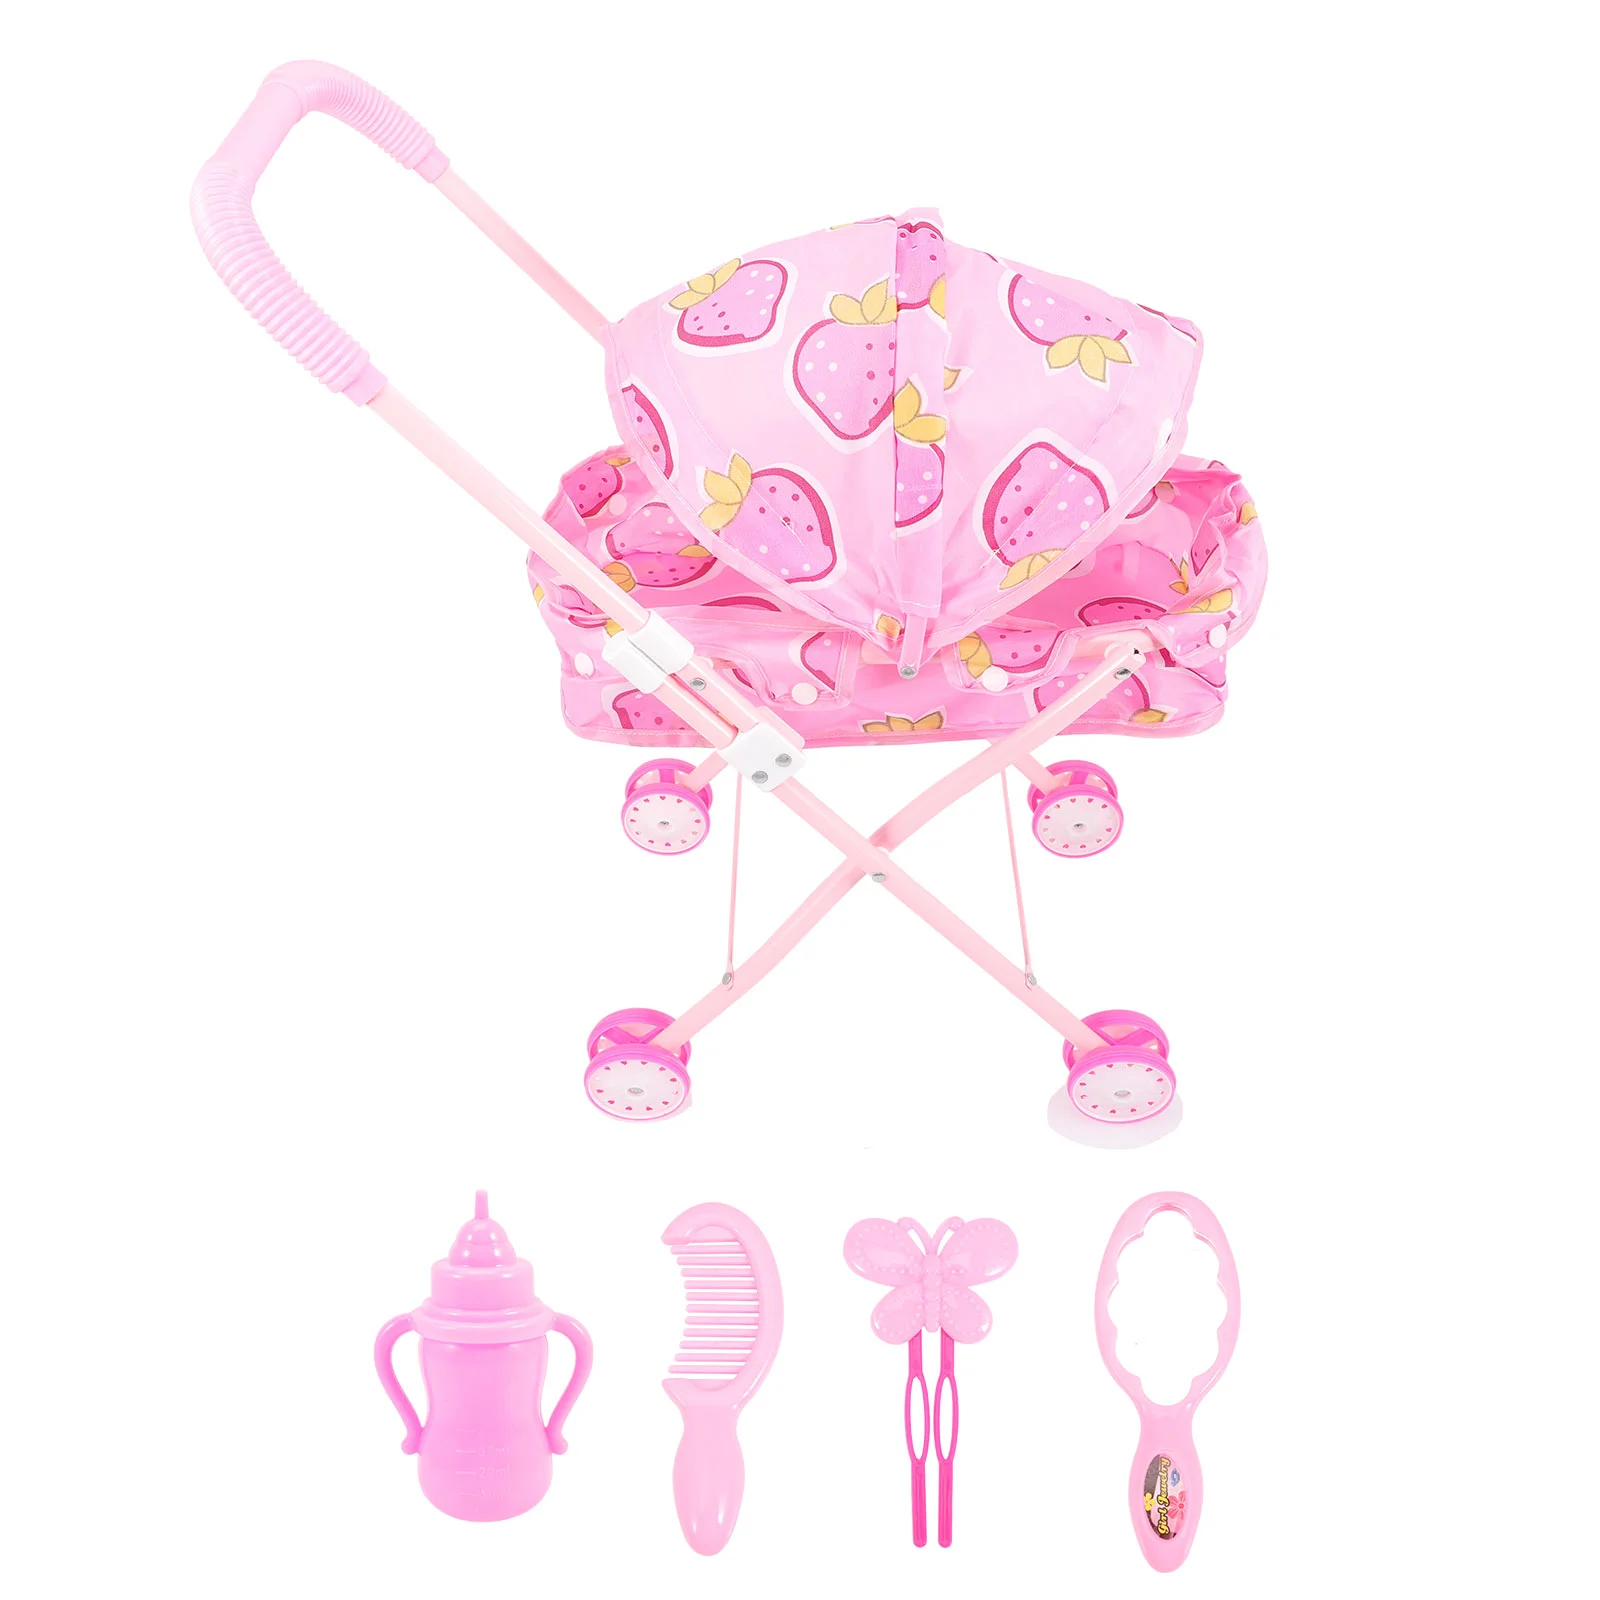 

Stroller Toy Baby Dolls Toddlers 1-3 Car Toys Awning 5 Year Old Girls Plastic 2 Carseat